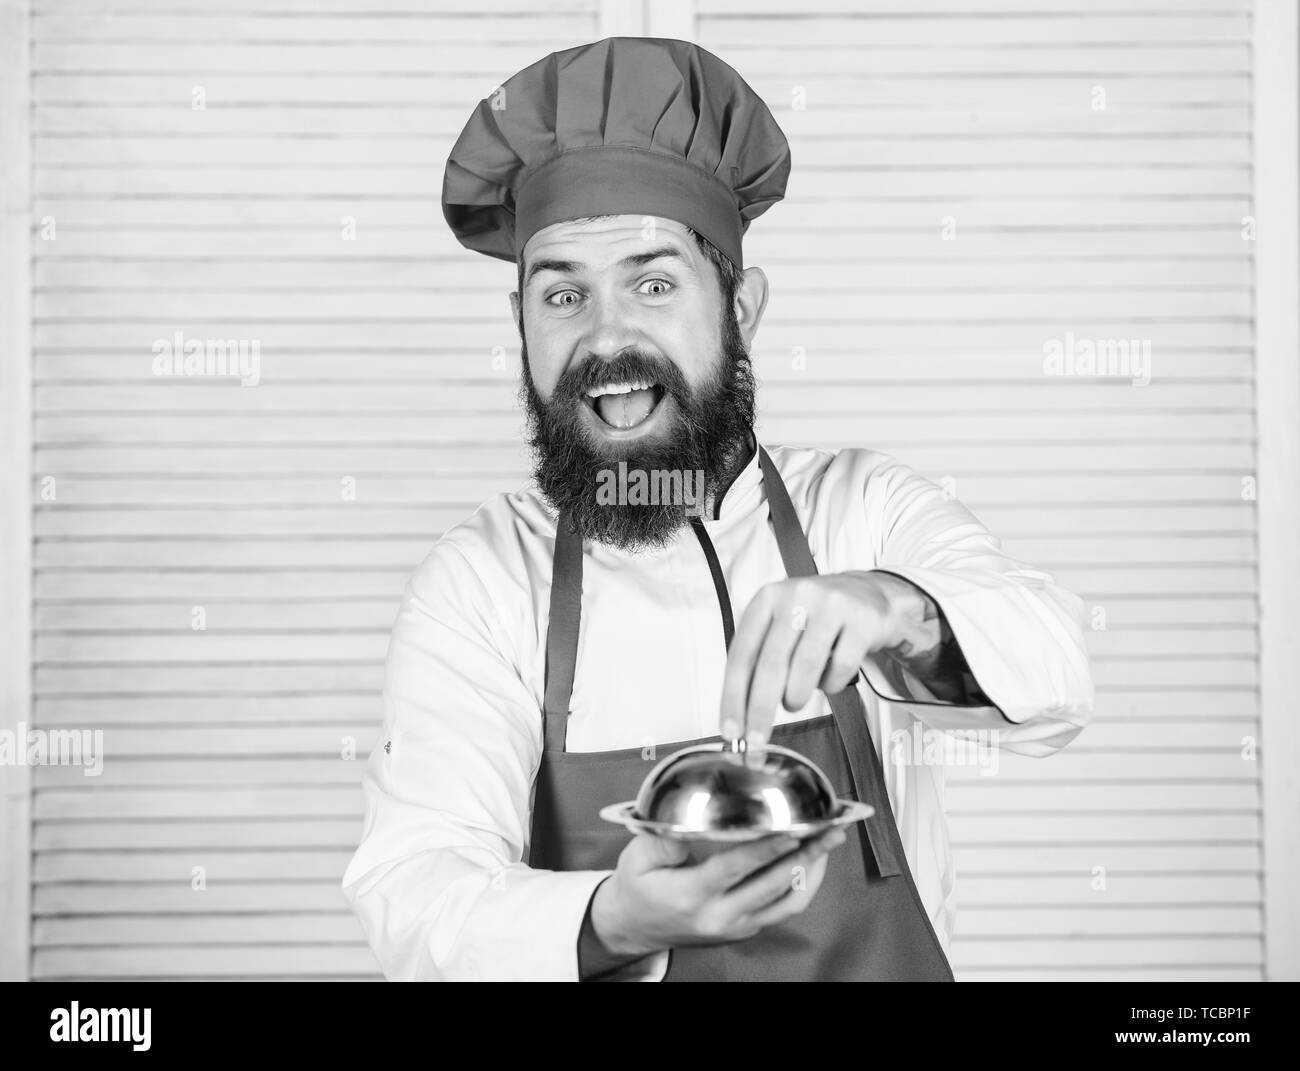 Meticulous food Black and White Stock Photos & Images - Alamy